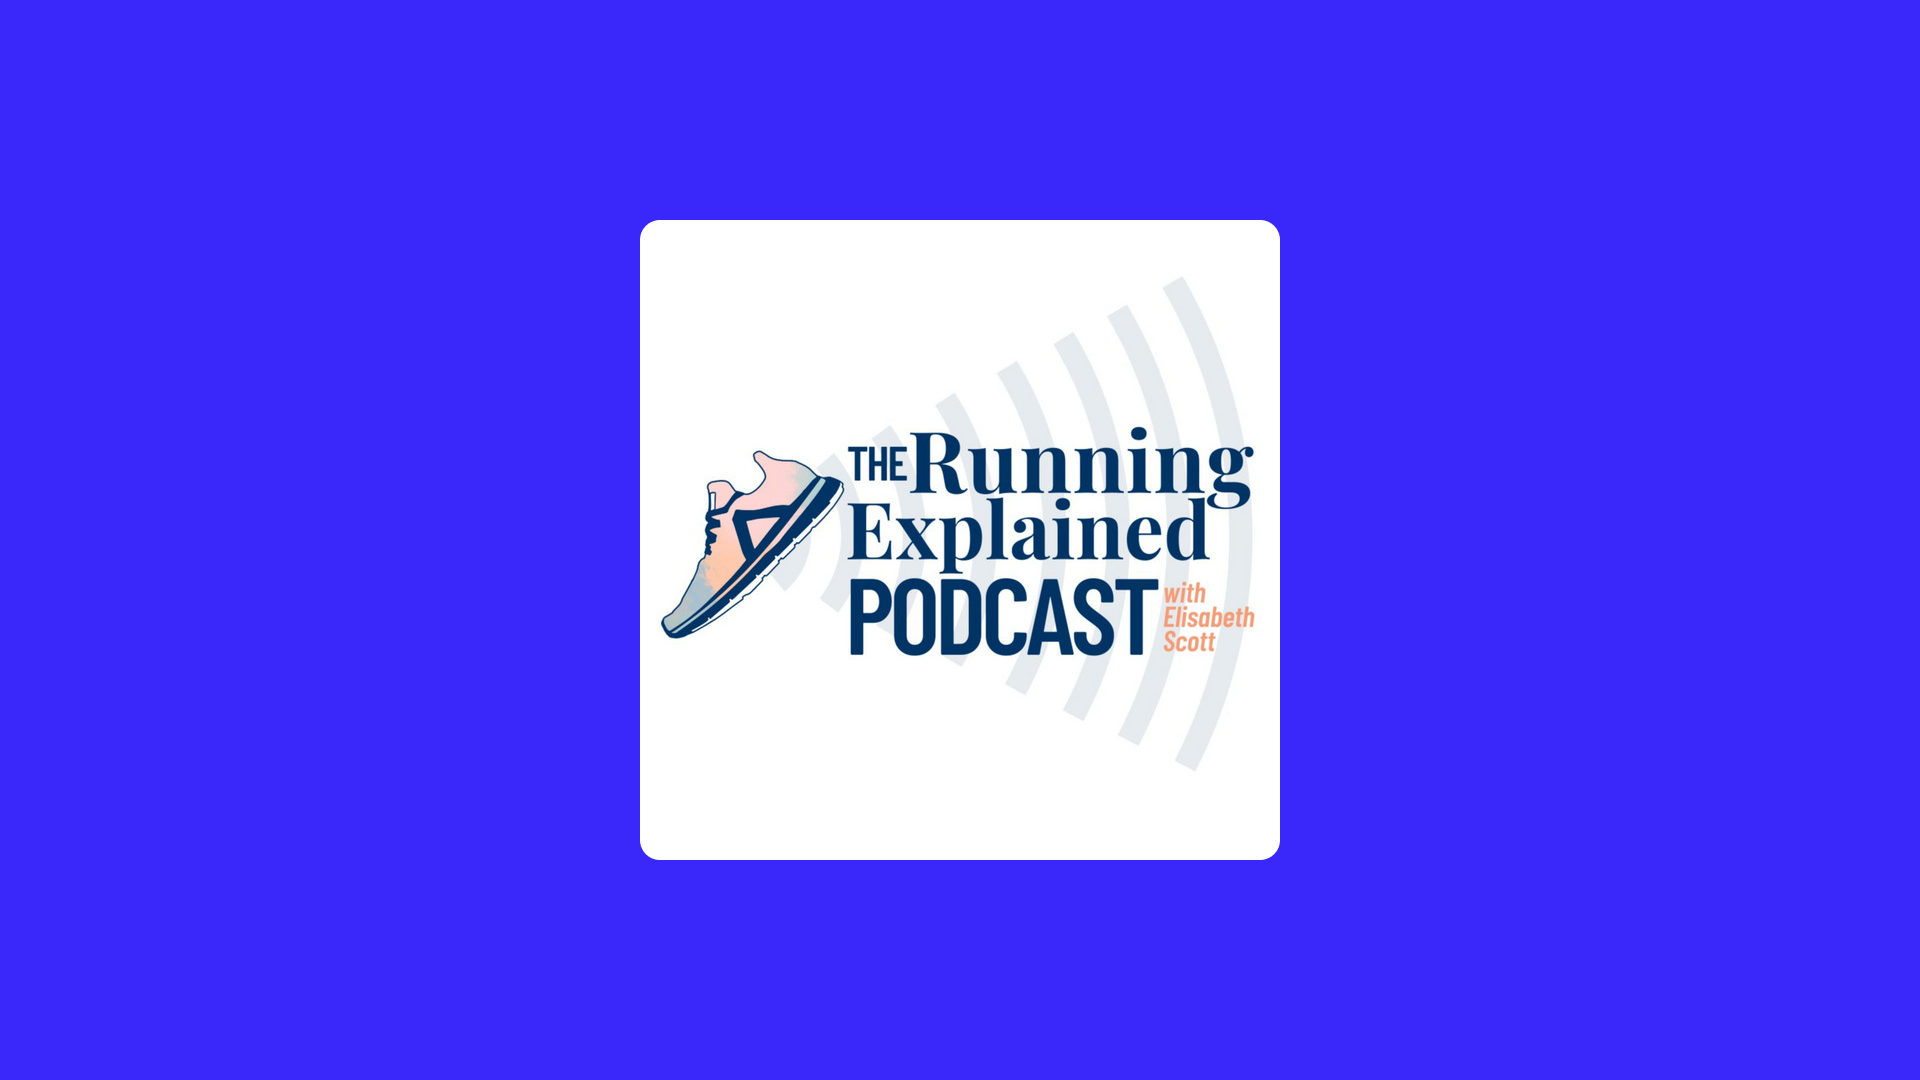 The Running Explained Podcast